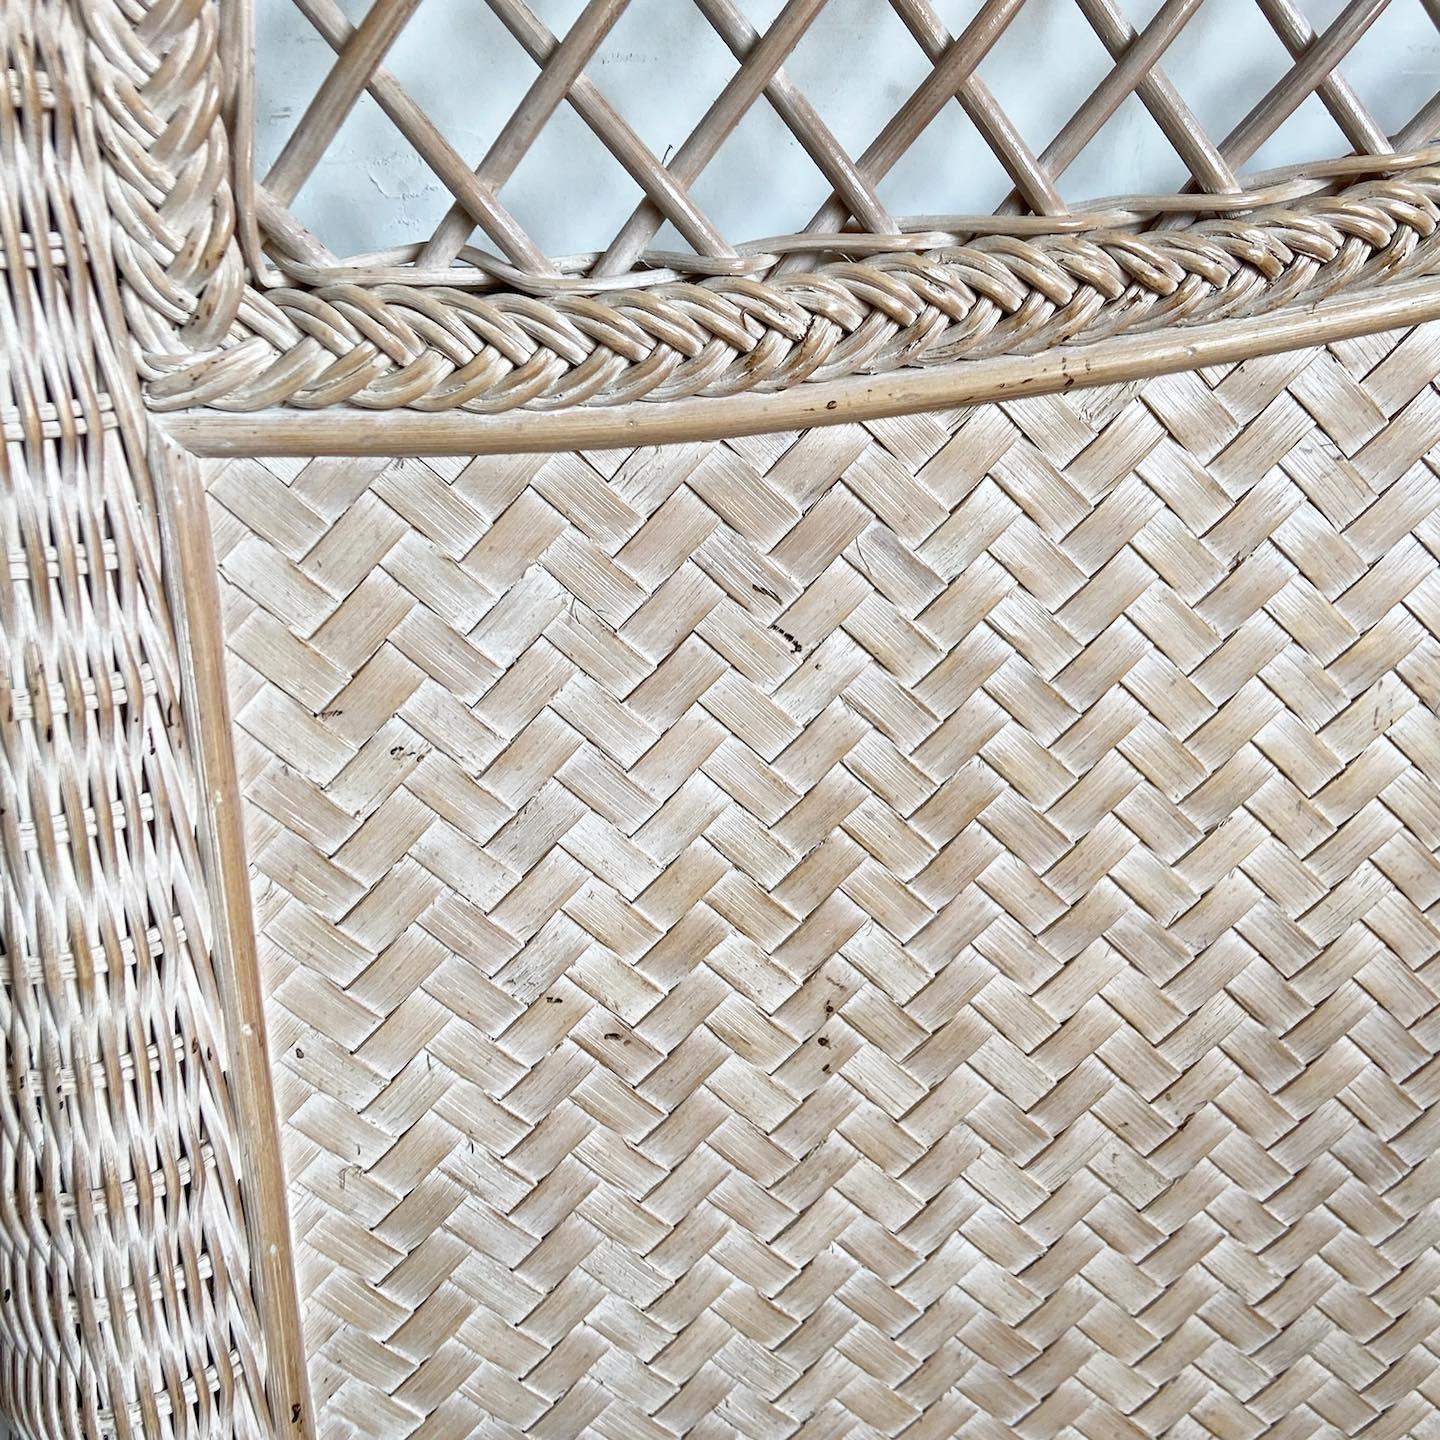 Boho Chic Rattan and Wicker Queen Headboard For Sale 1